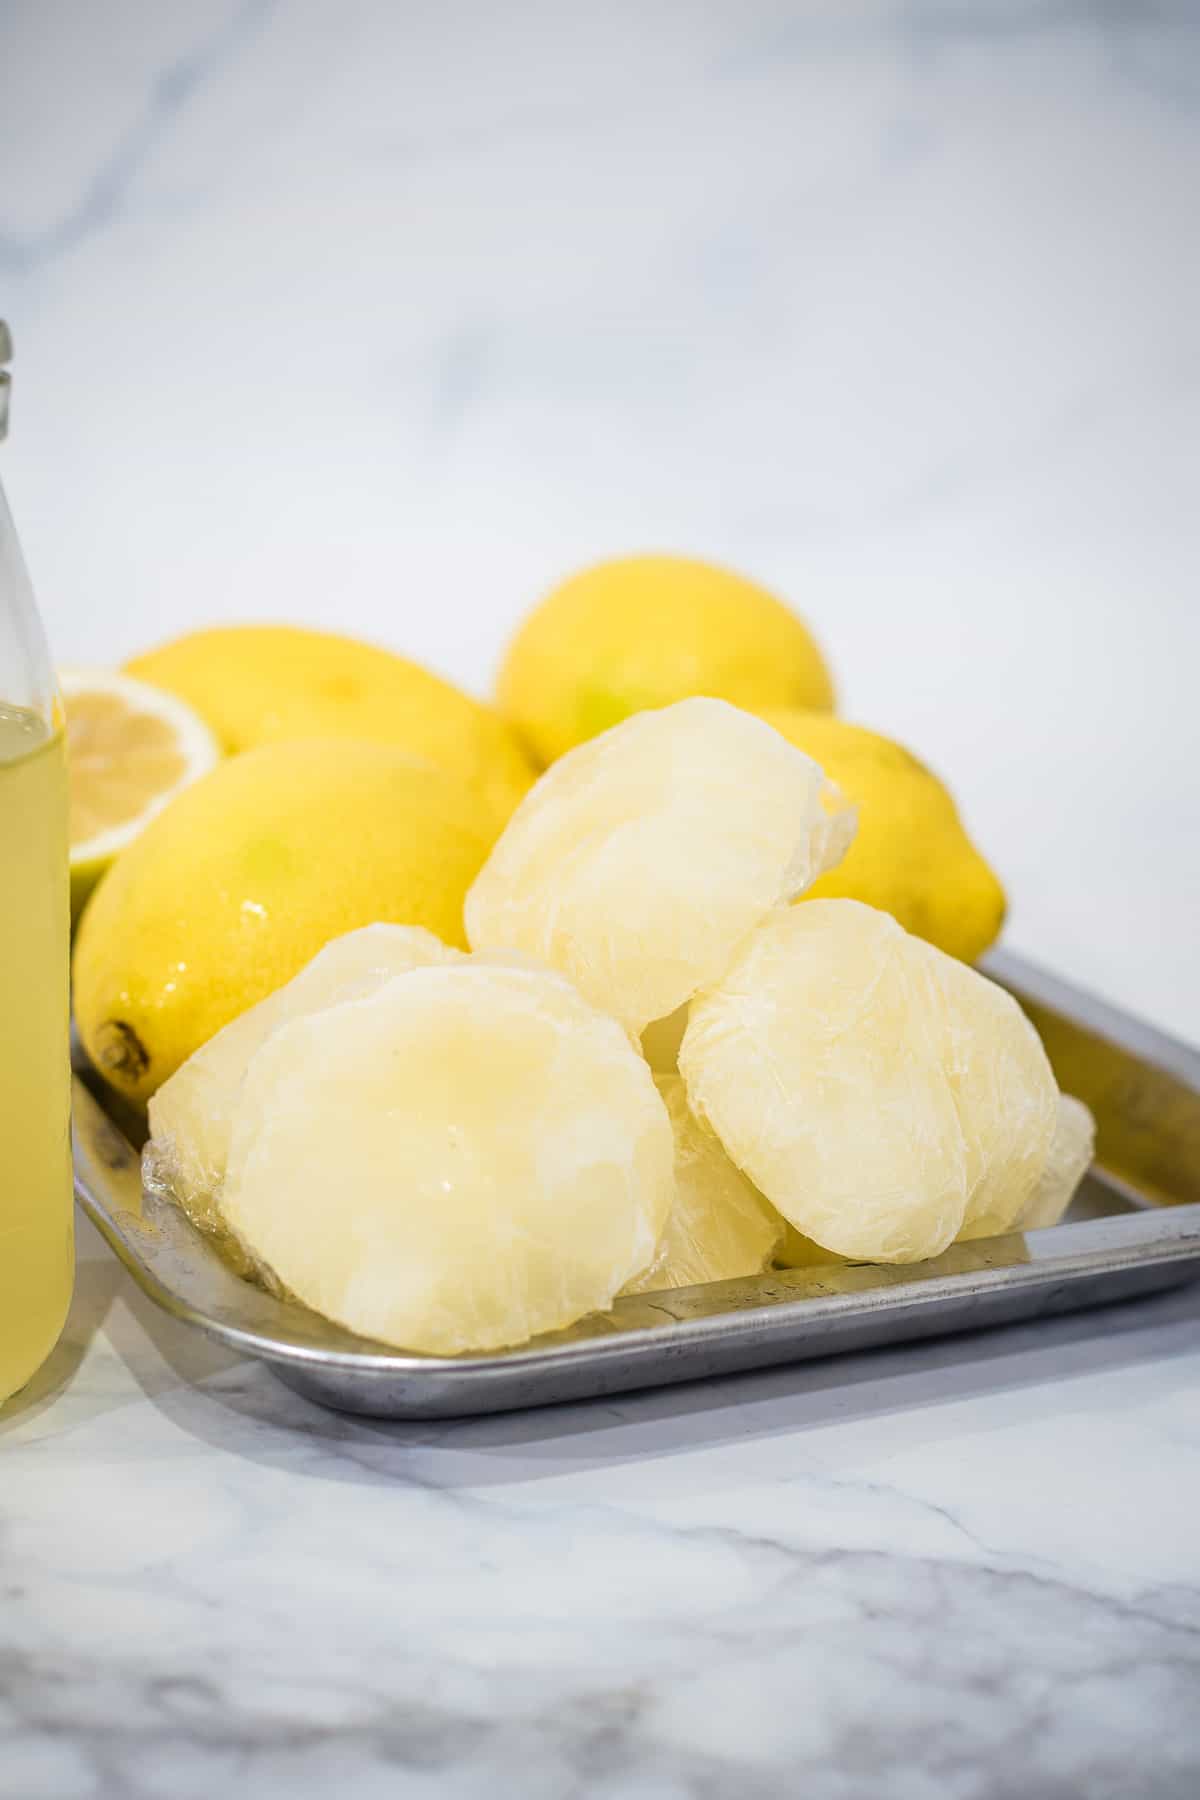 Wrapped frozen lemonade concentrate on a tray.